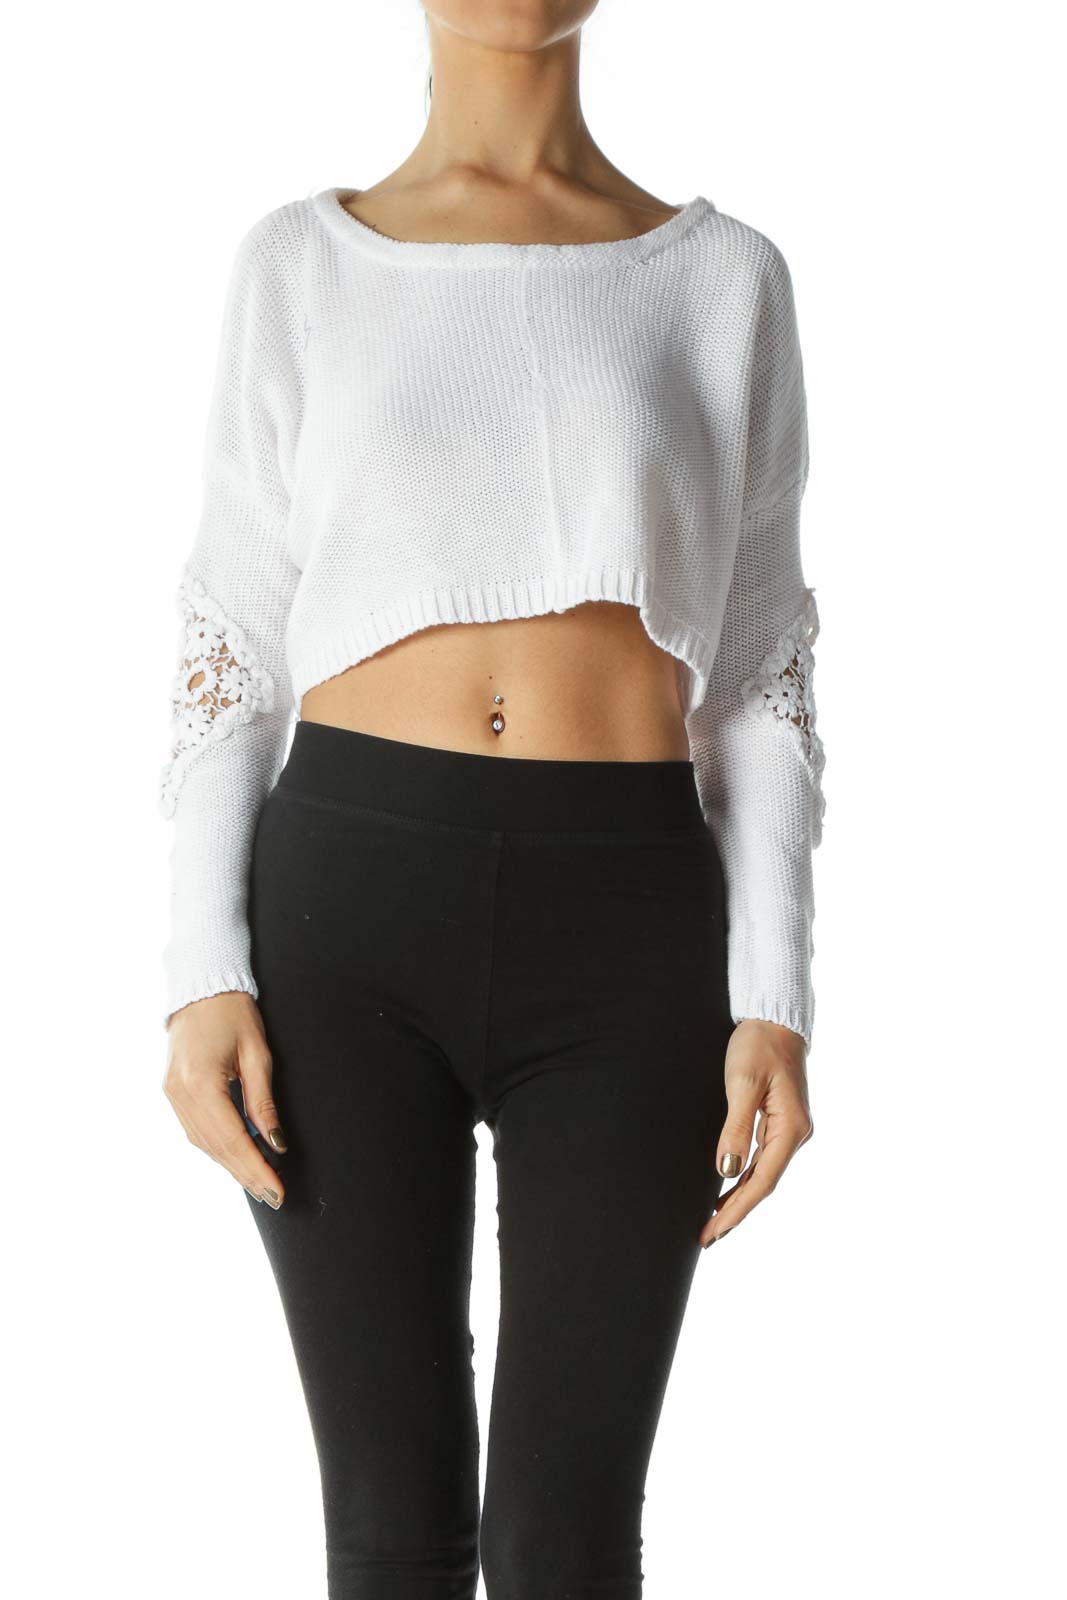 White Crocheted Long-Sleeve Crop-Top With Floral Lace Front